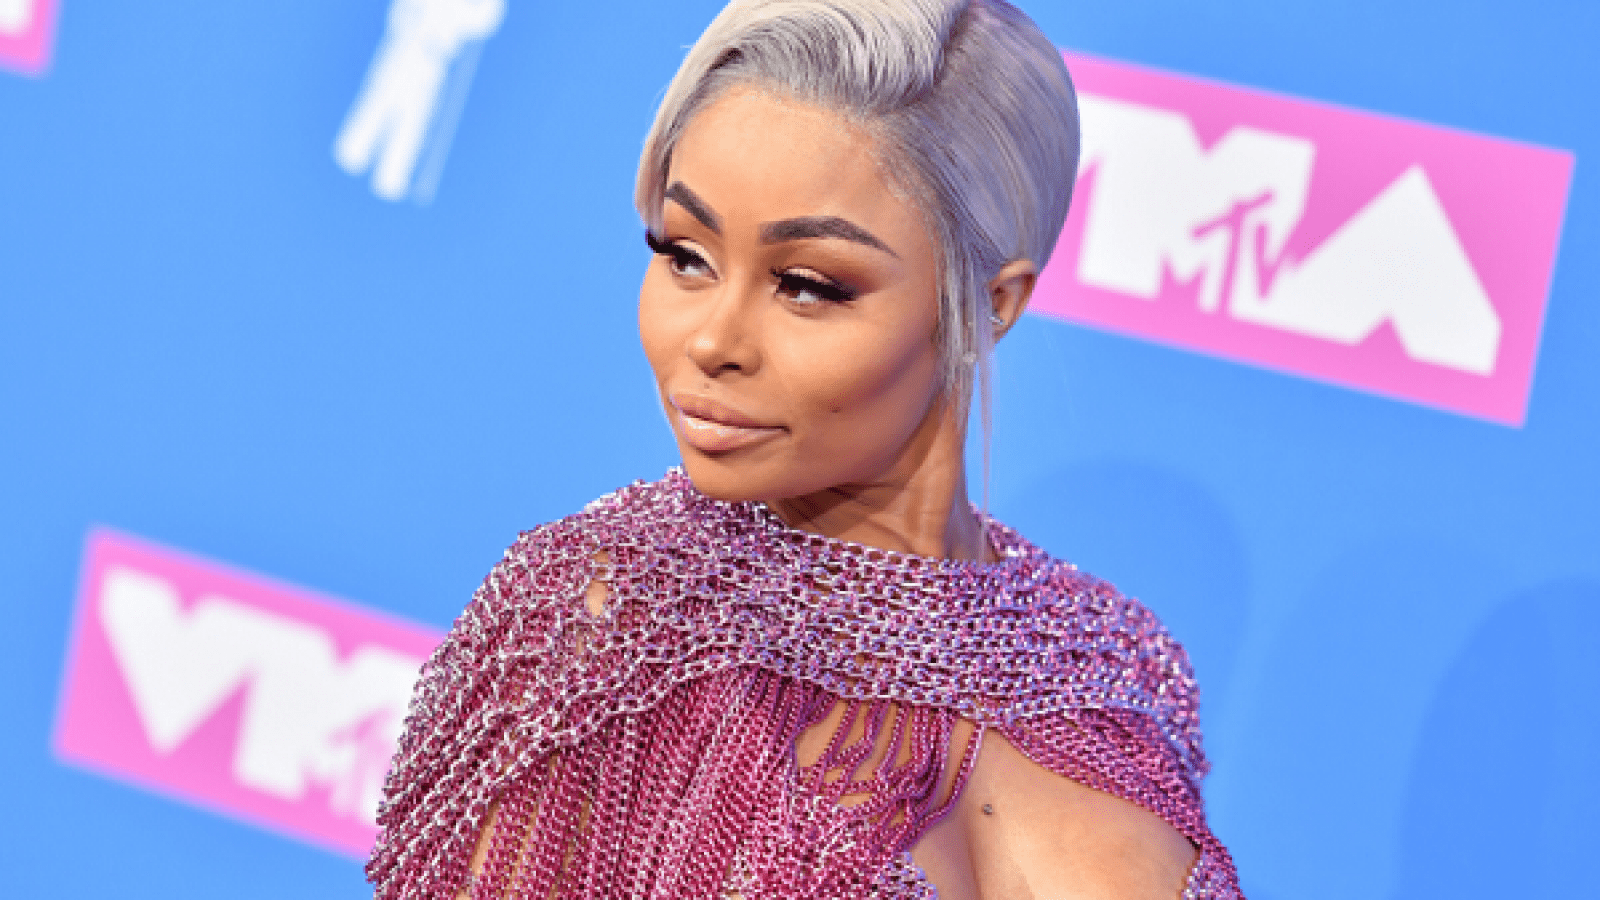 Blac Chyna Drops New Music Video For Her Single Called 'Hollywood'